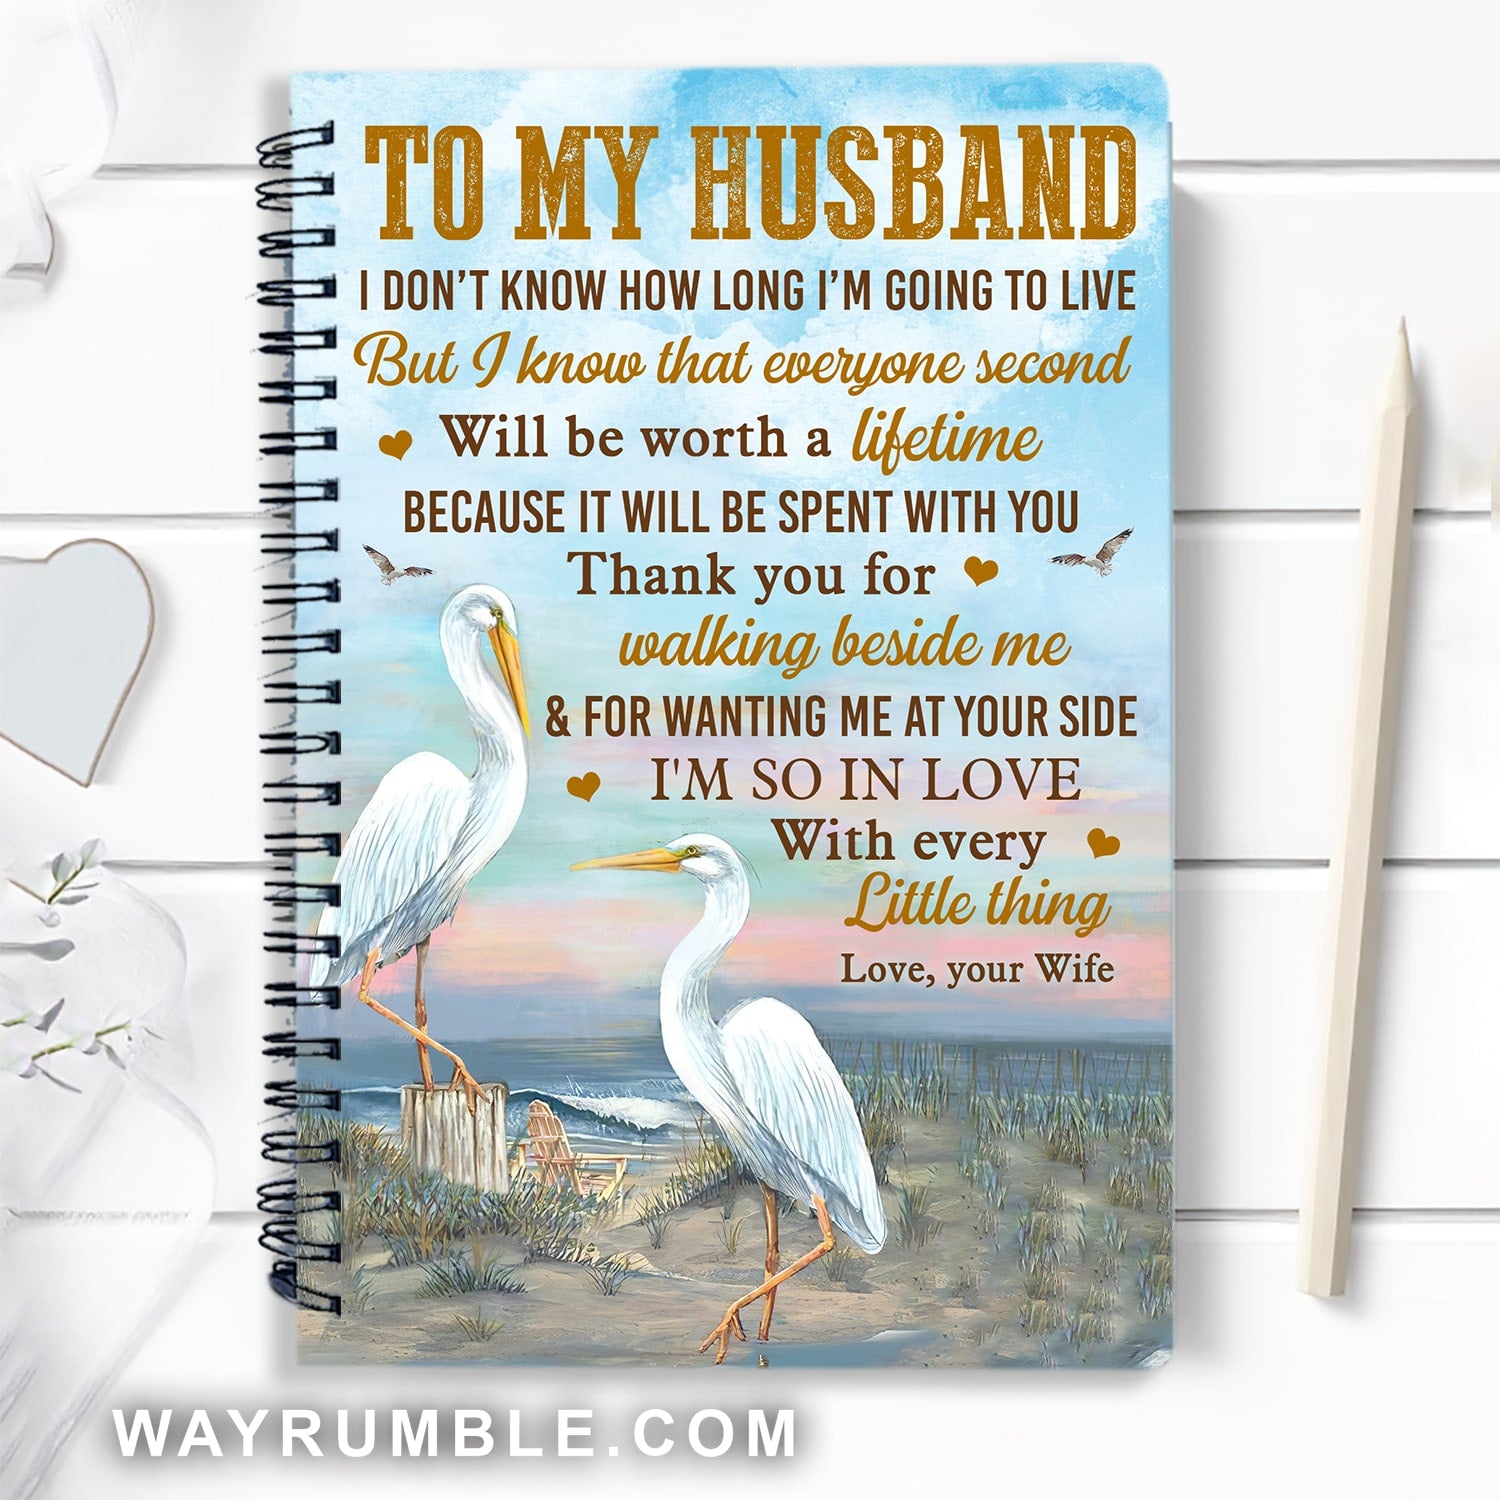 To my husband, Egret painting, Thank you for walking beside me - Couple Spiral Journal